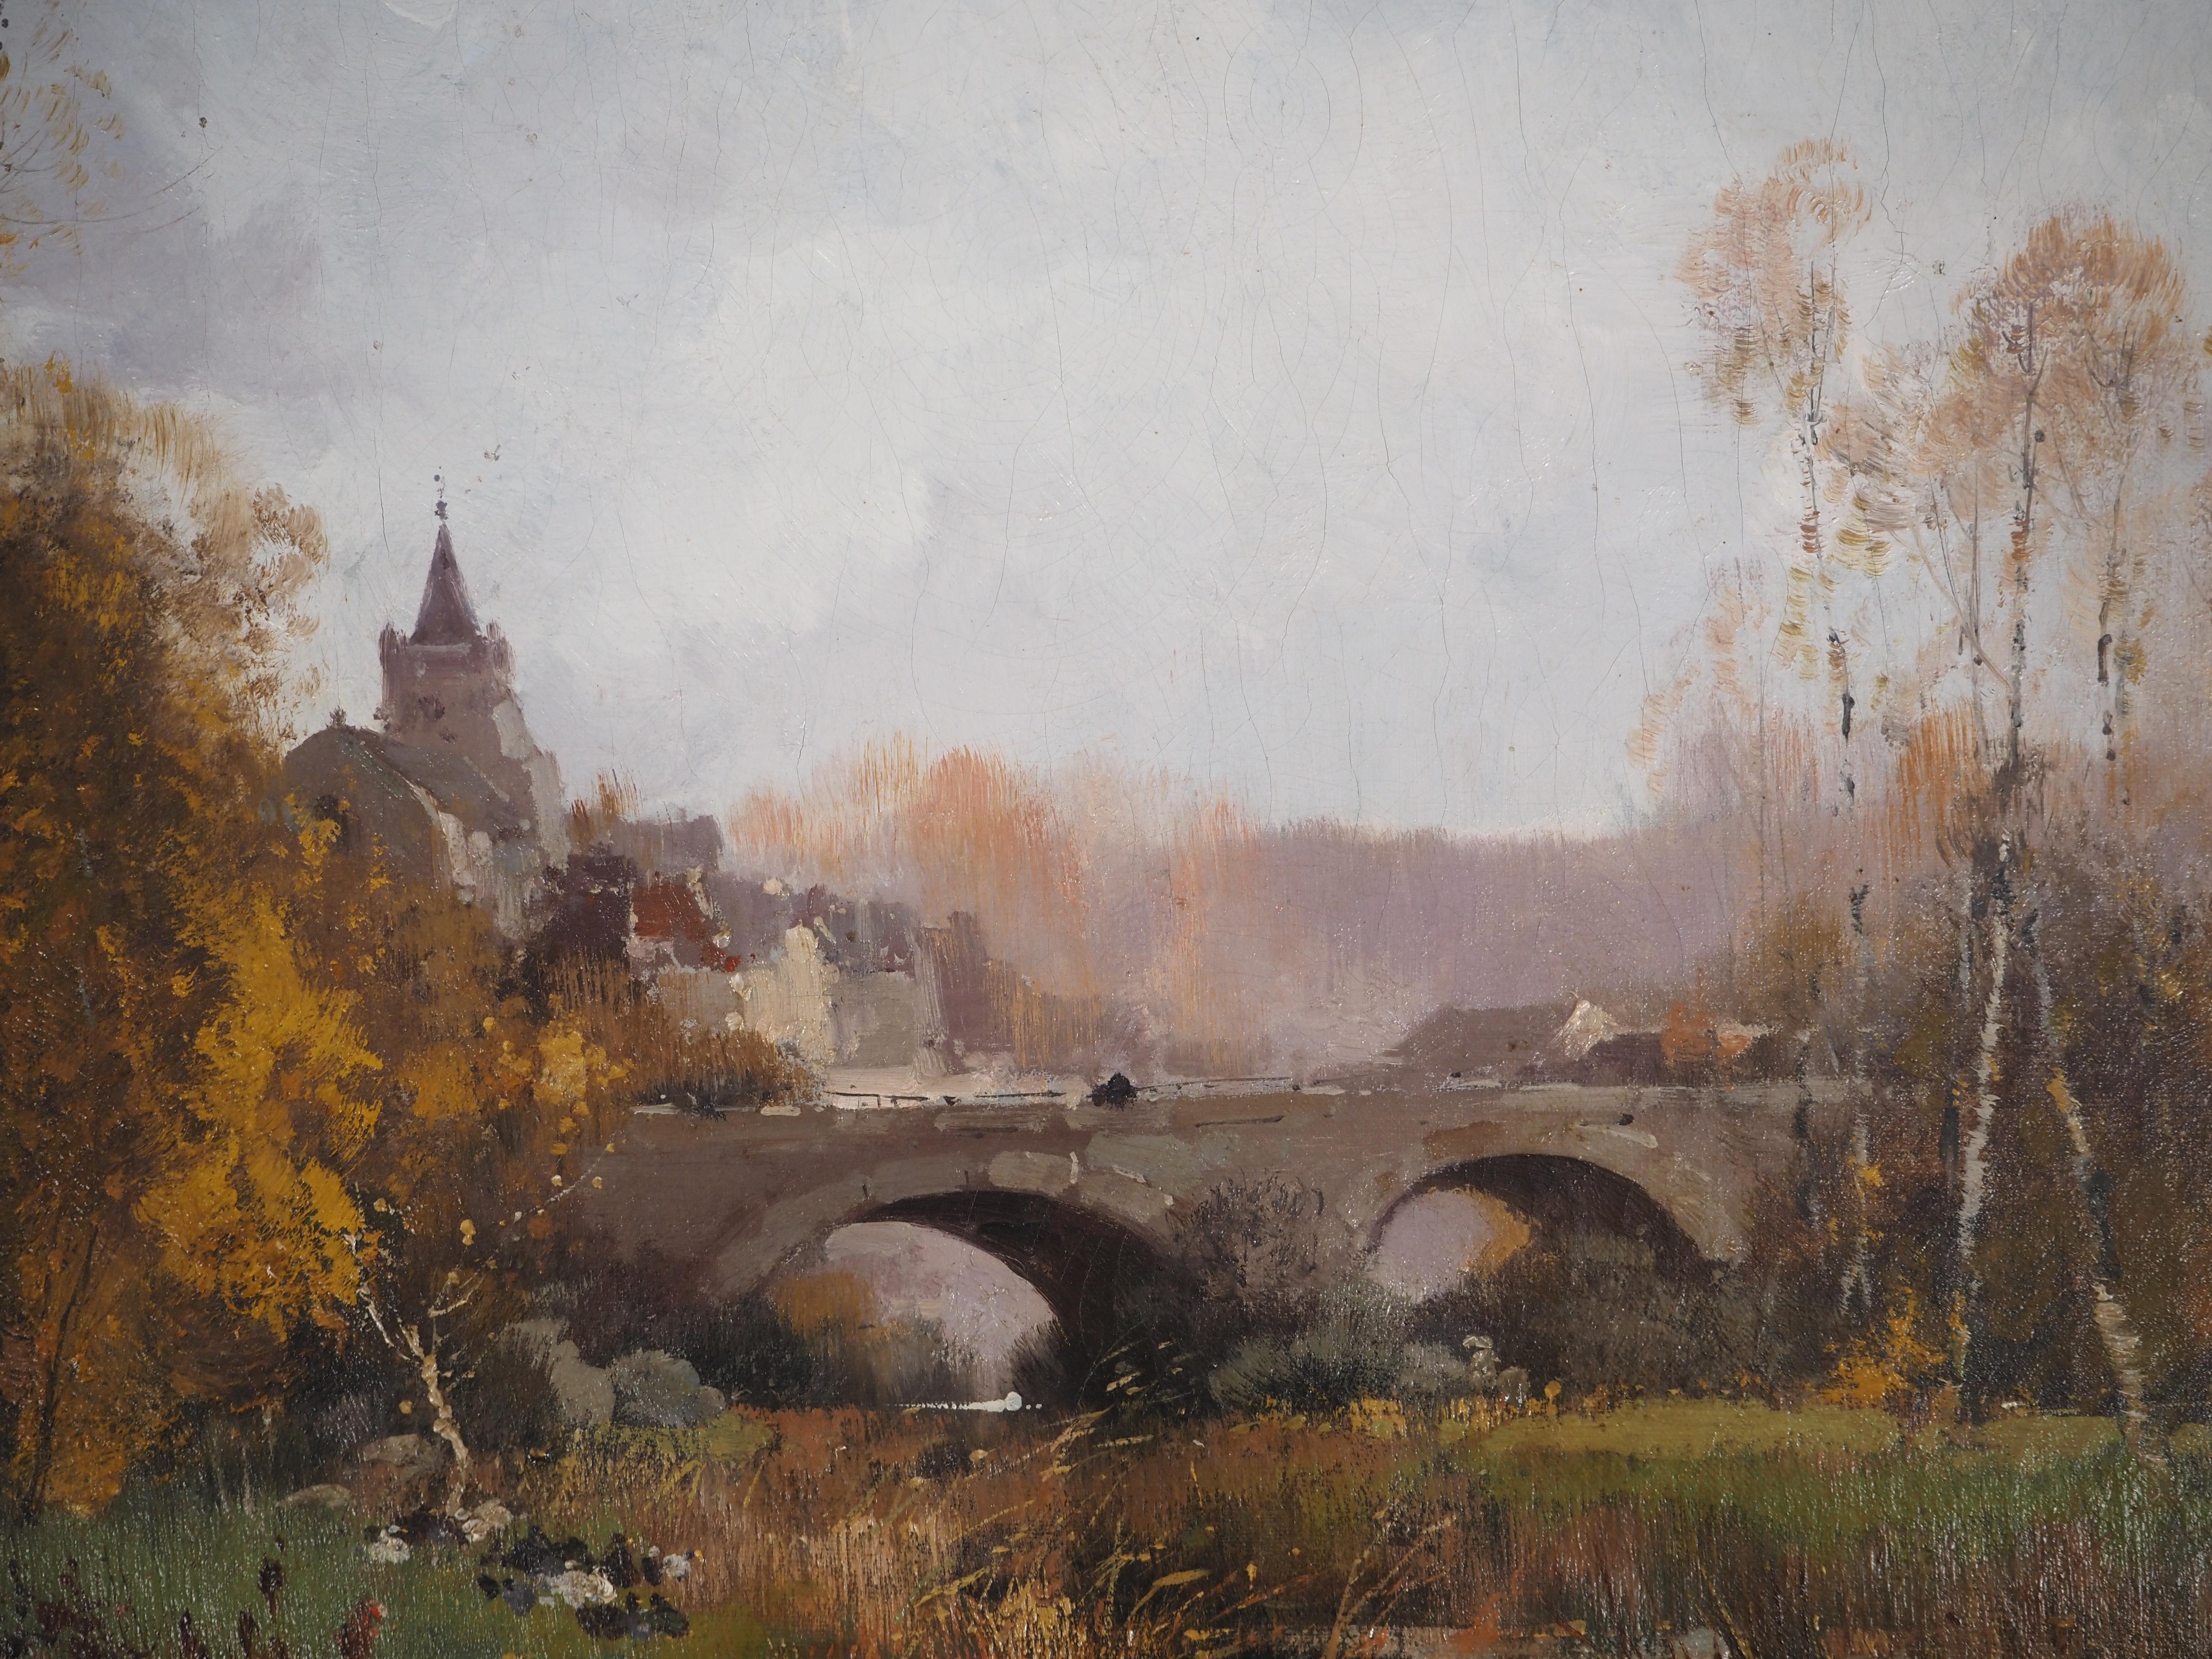 Eugene GALIEN - LALOUE
Normandy, Bridge Near a Village 

Original oil painting on canvas 
Signed bottom left J Lievin (pseudonym of the artist)
On canvas 46 x 65 cm (c. 18 x 26 in)
Presented in a golden wood frame 54 x 73 cm (c. 22 x 29 in)

Very